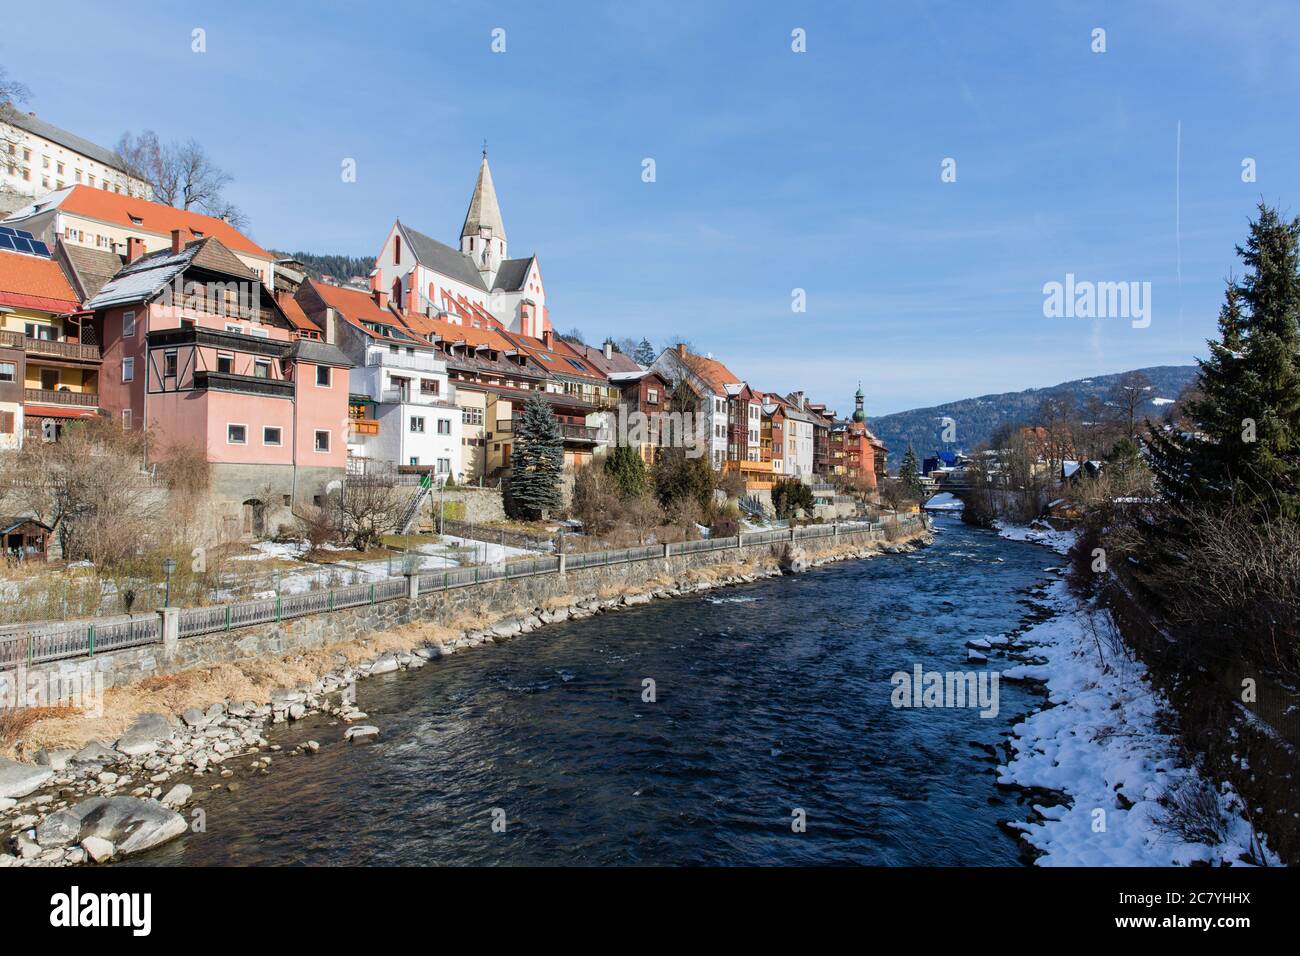 City view of Murau in Styria (Austria) with the Mur river Stock Photo